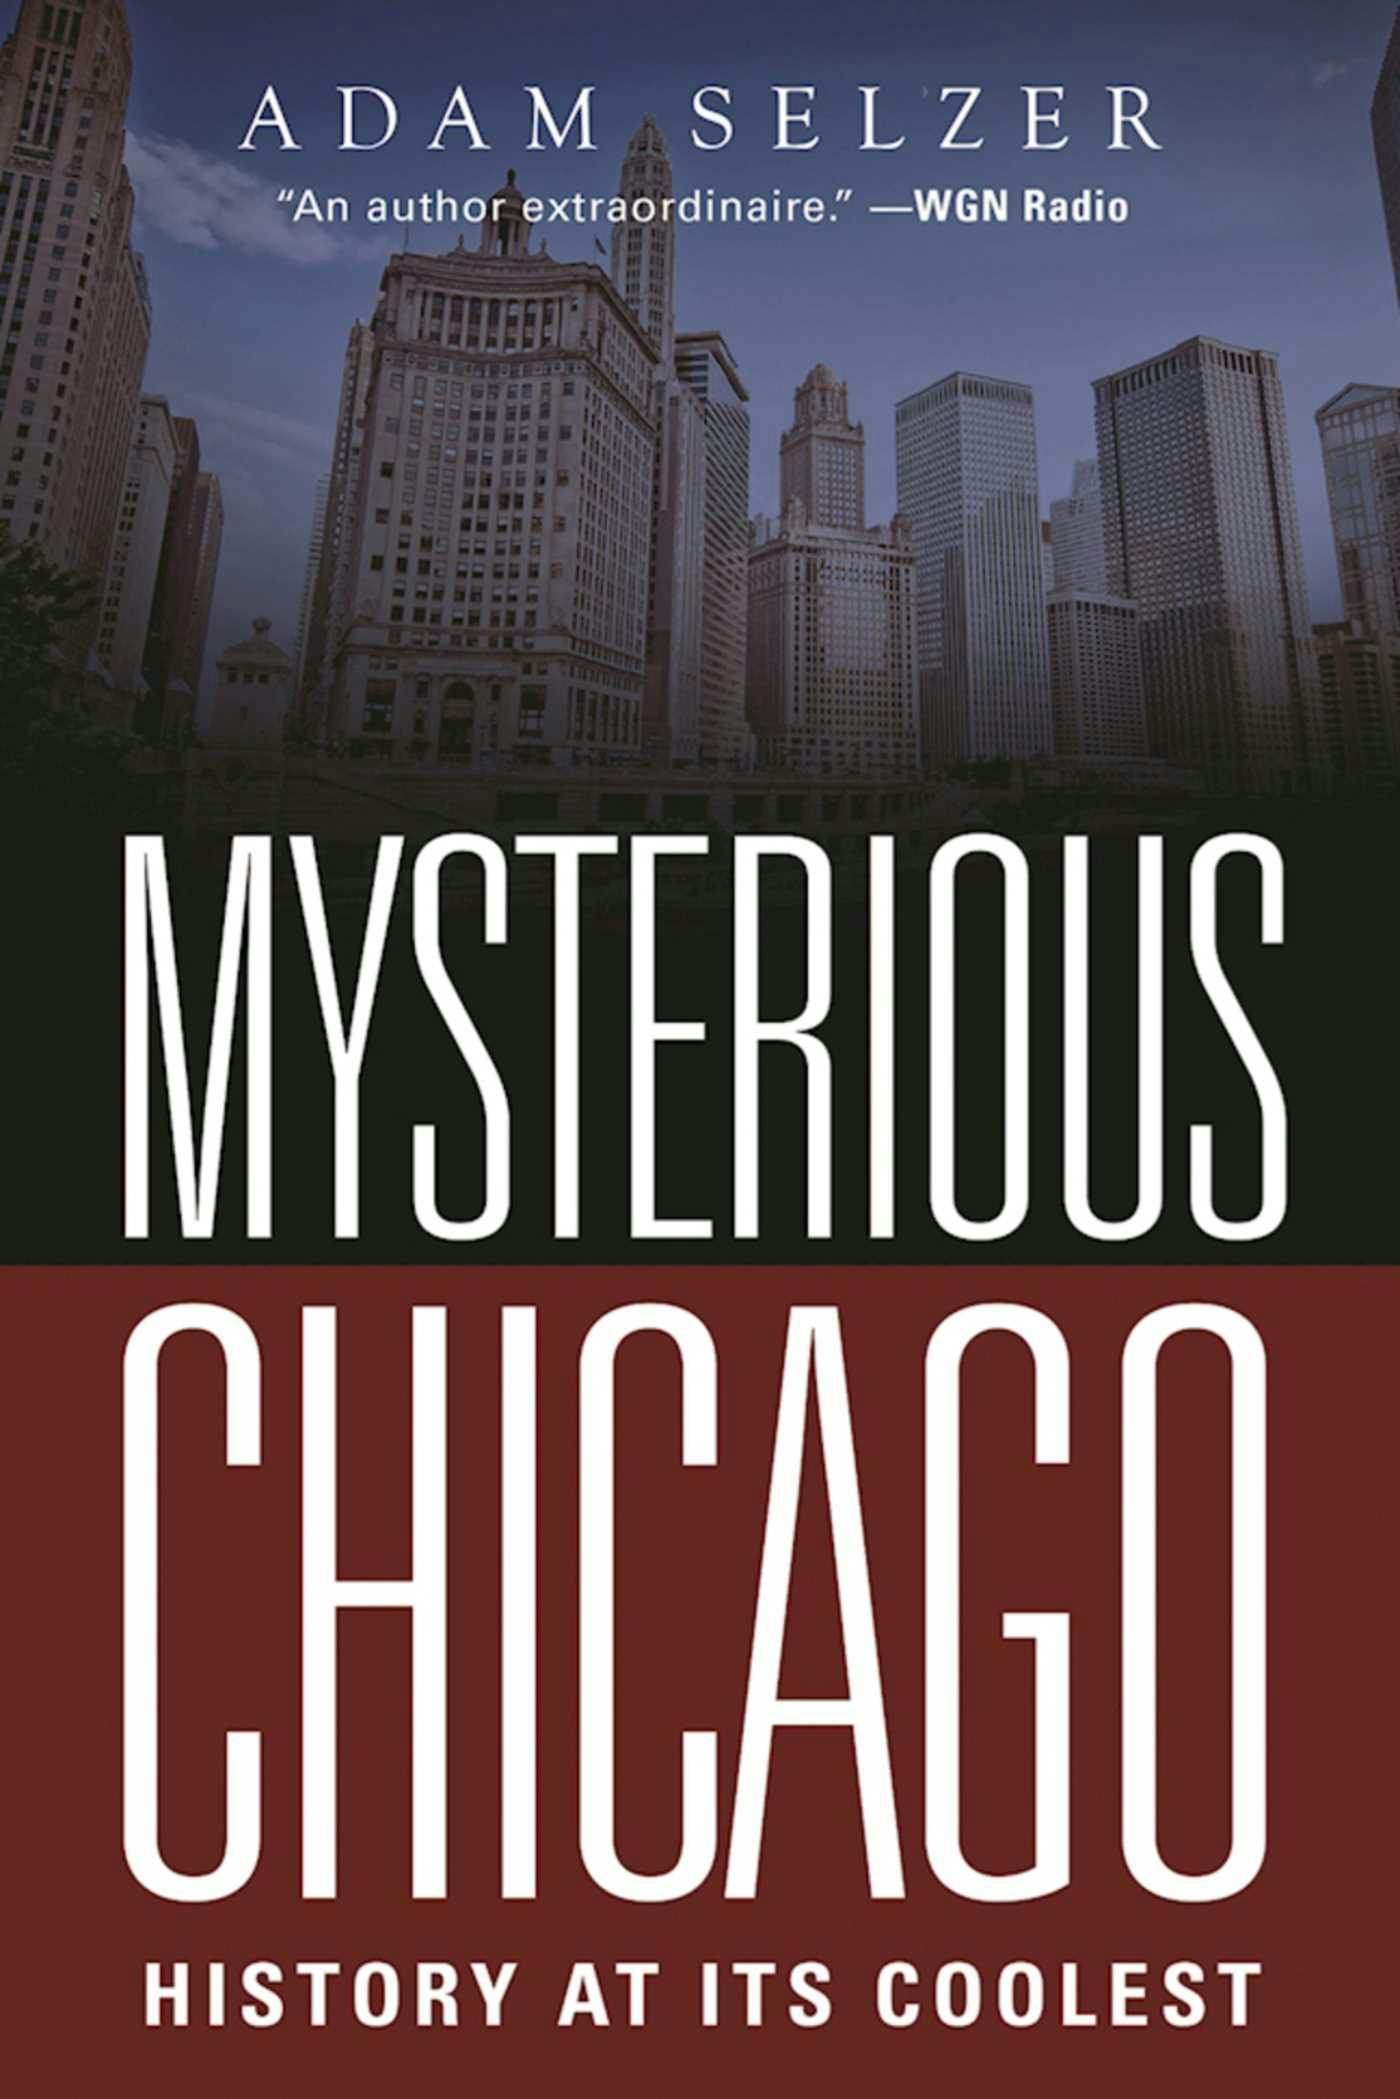 Mysterious Chicago: History at Its Coolest - Adam Selzer